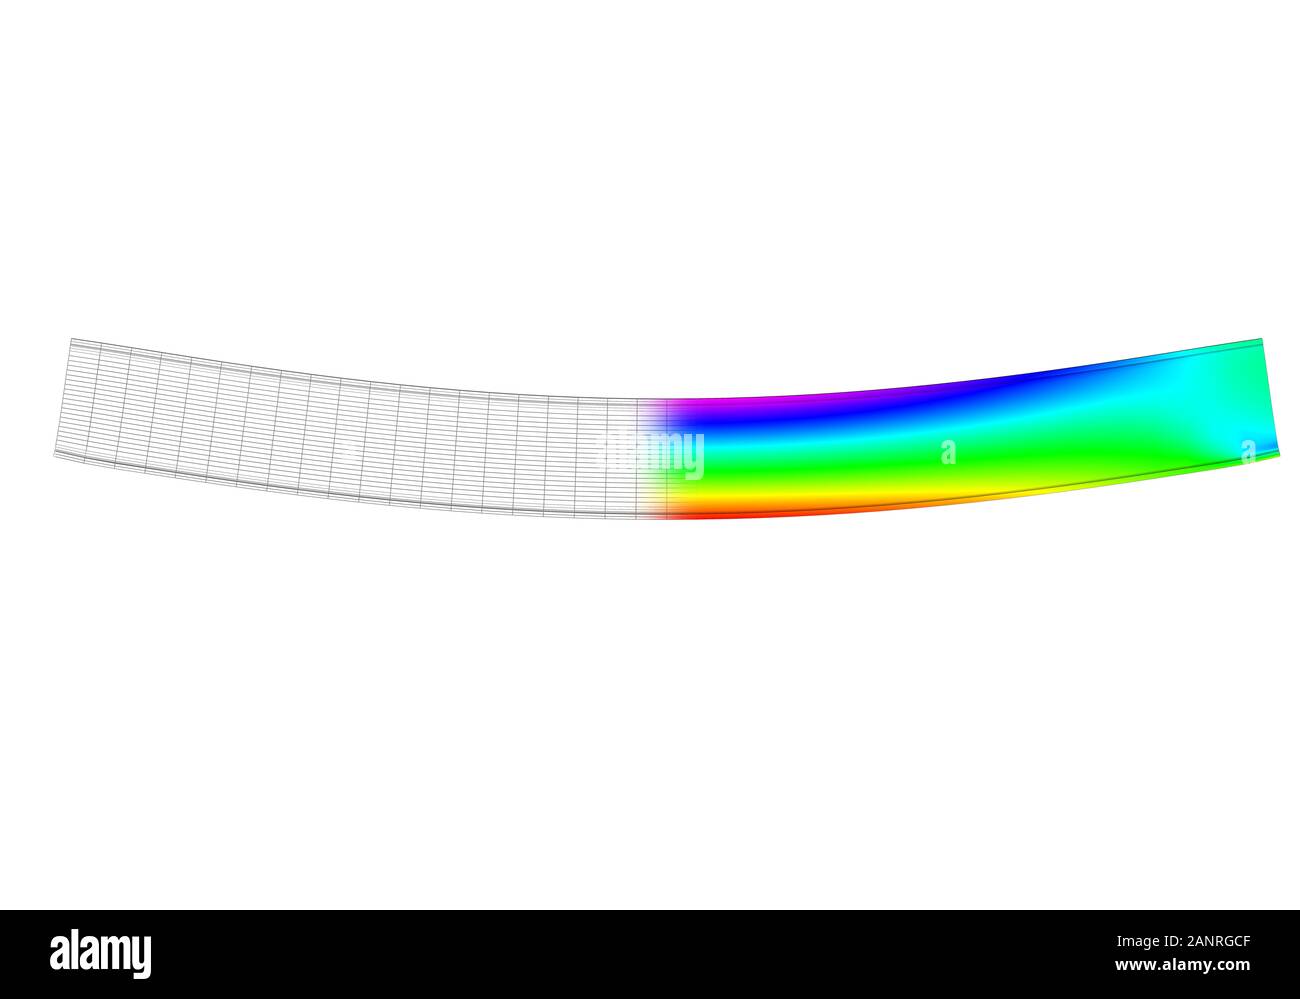 A Simple Supported I Beam Bending Side 3d View Of Mesh Deformation And Plot Of Normal Stresses From Finite Element Analysis On White Backround Stock Photo Alamy